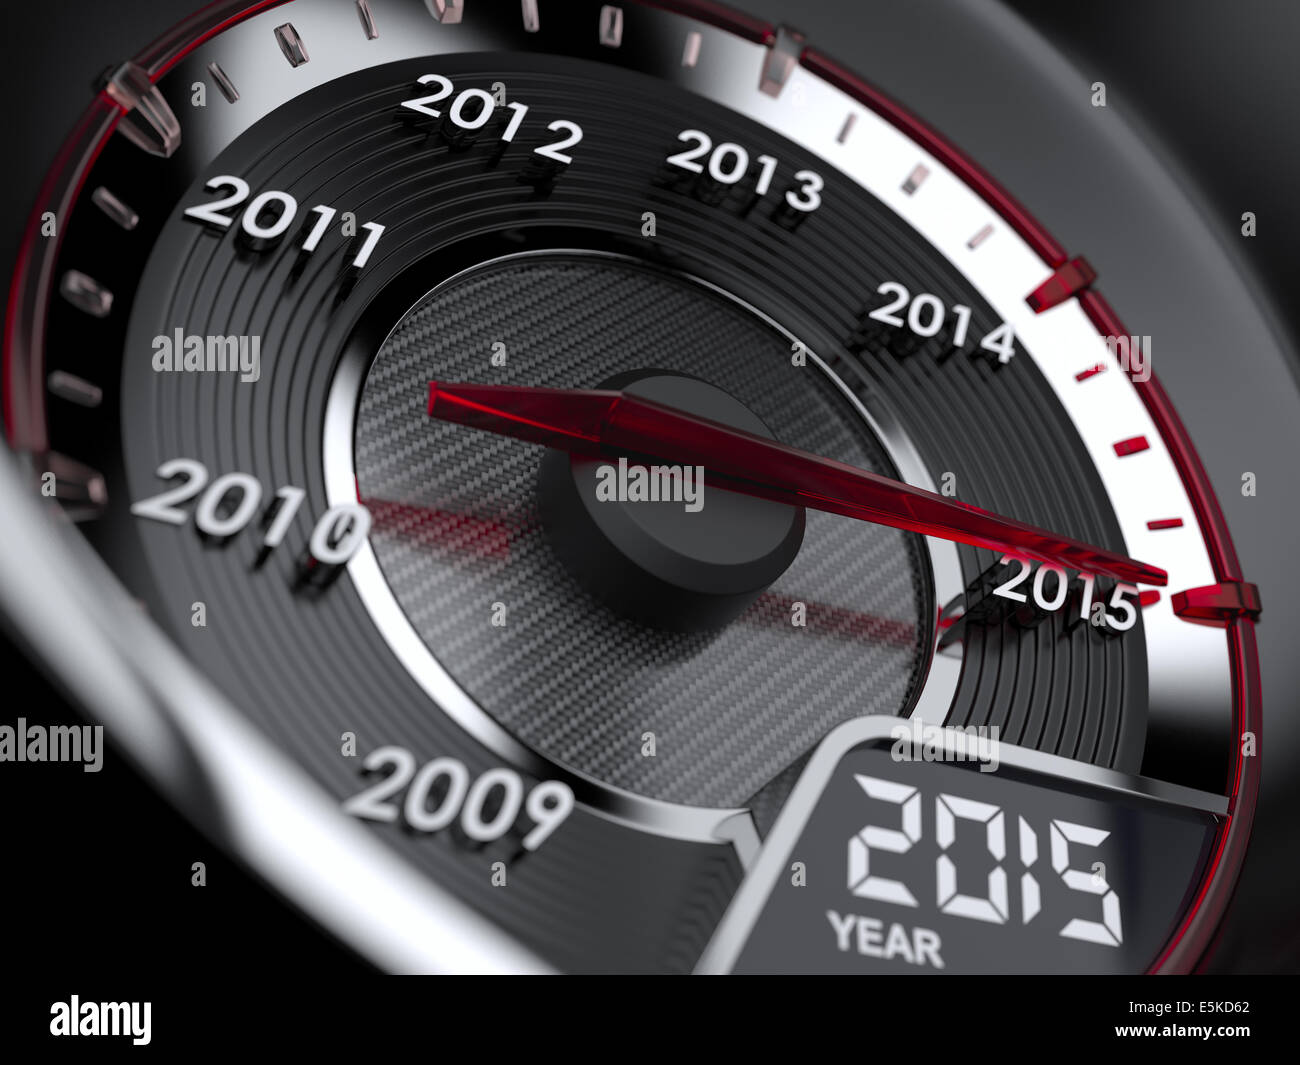 3d illustration of 2015 year car speedometer. Countdown concept Stock Photo